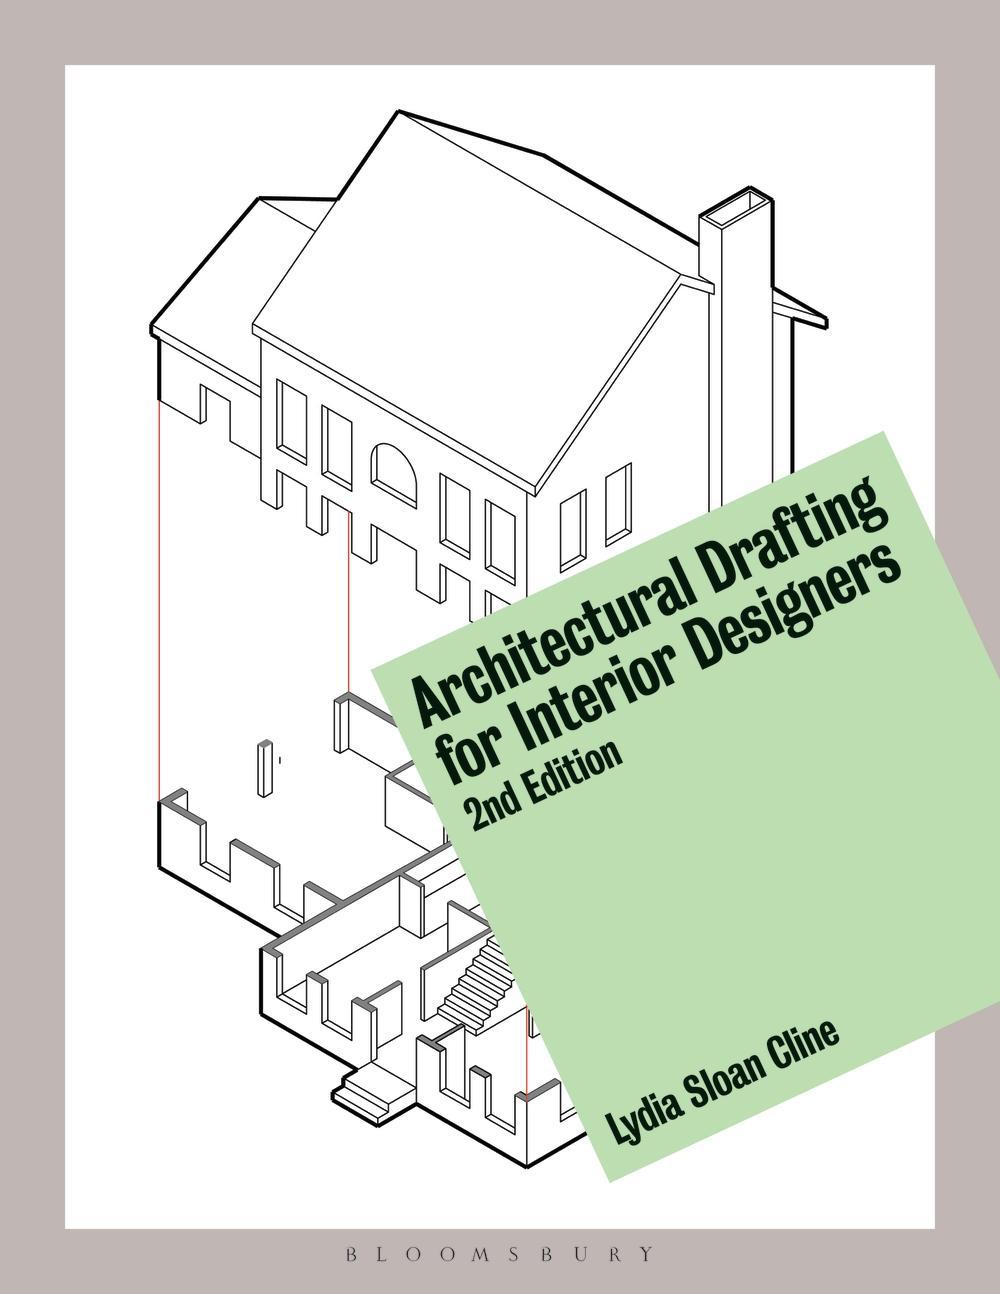 Architectural Drafting for Interior Designers - Lydia Sloan Cline